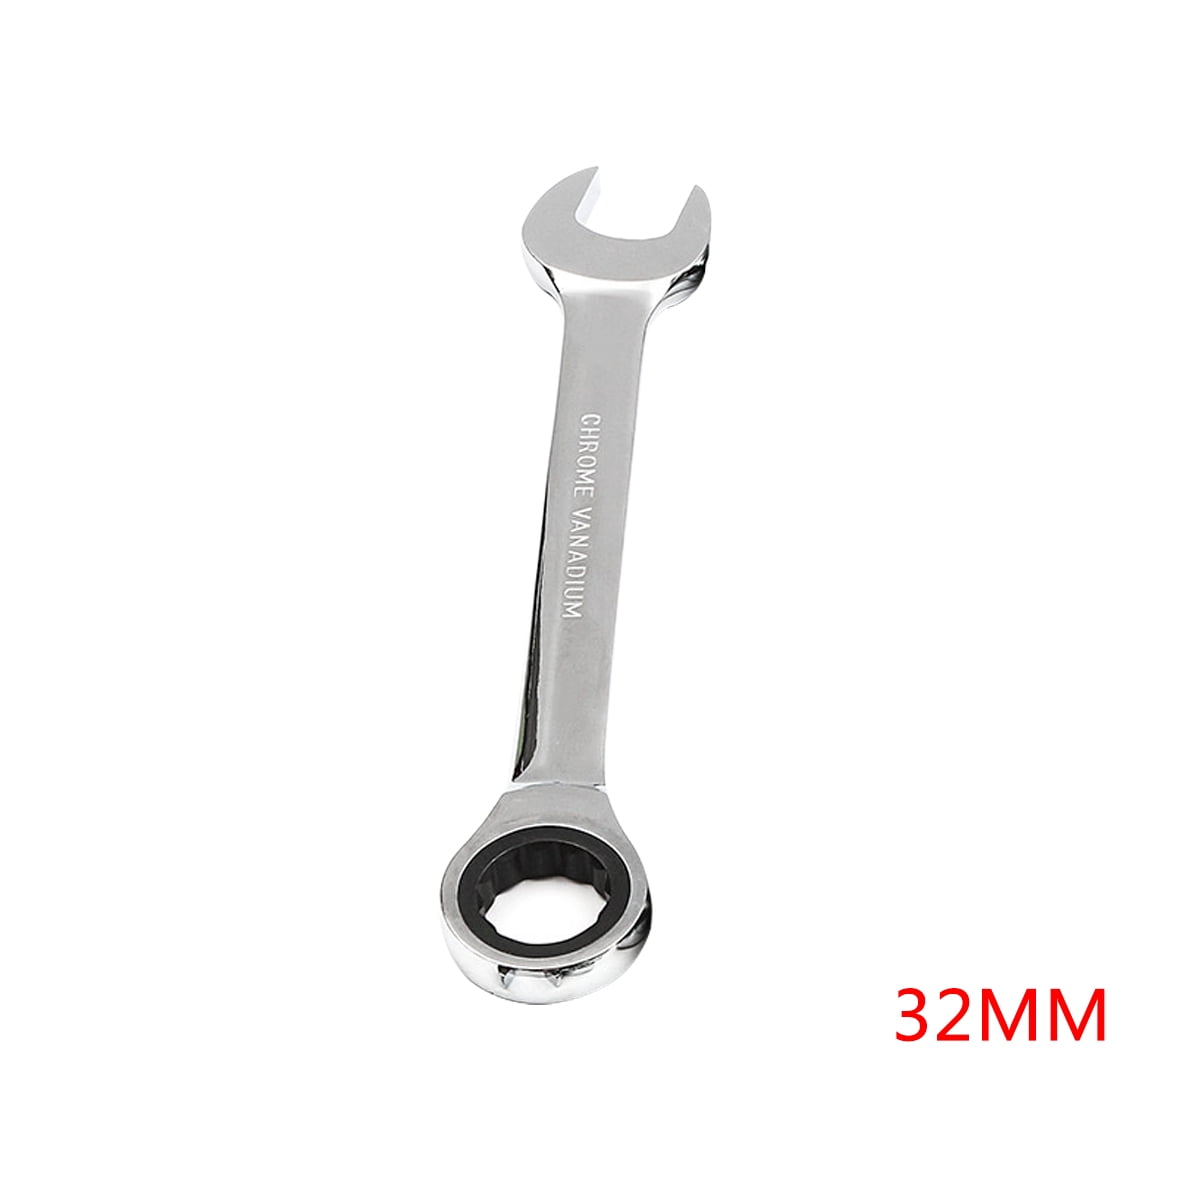 6mm-27mm Double Ended Ratchet Ring Spanner CrV Steel Chrome Plated Wrench Tools 